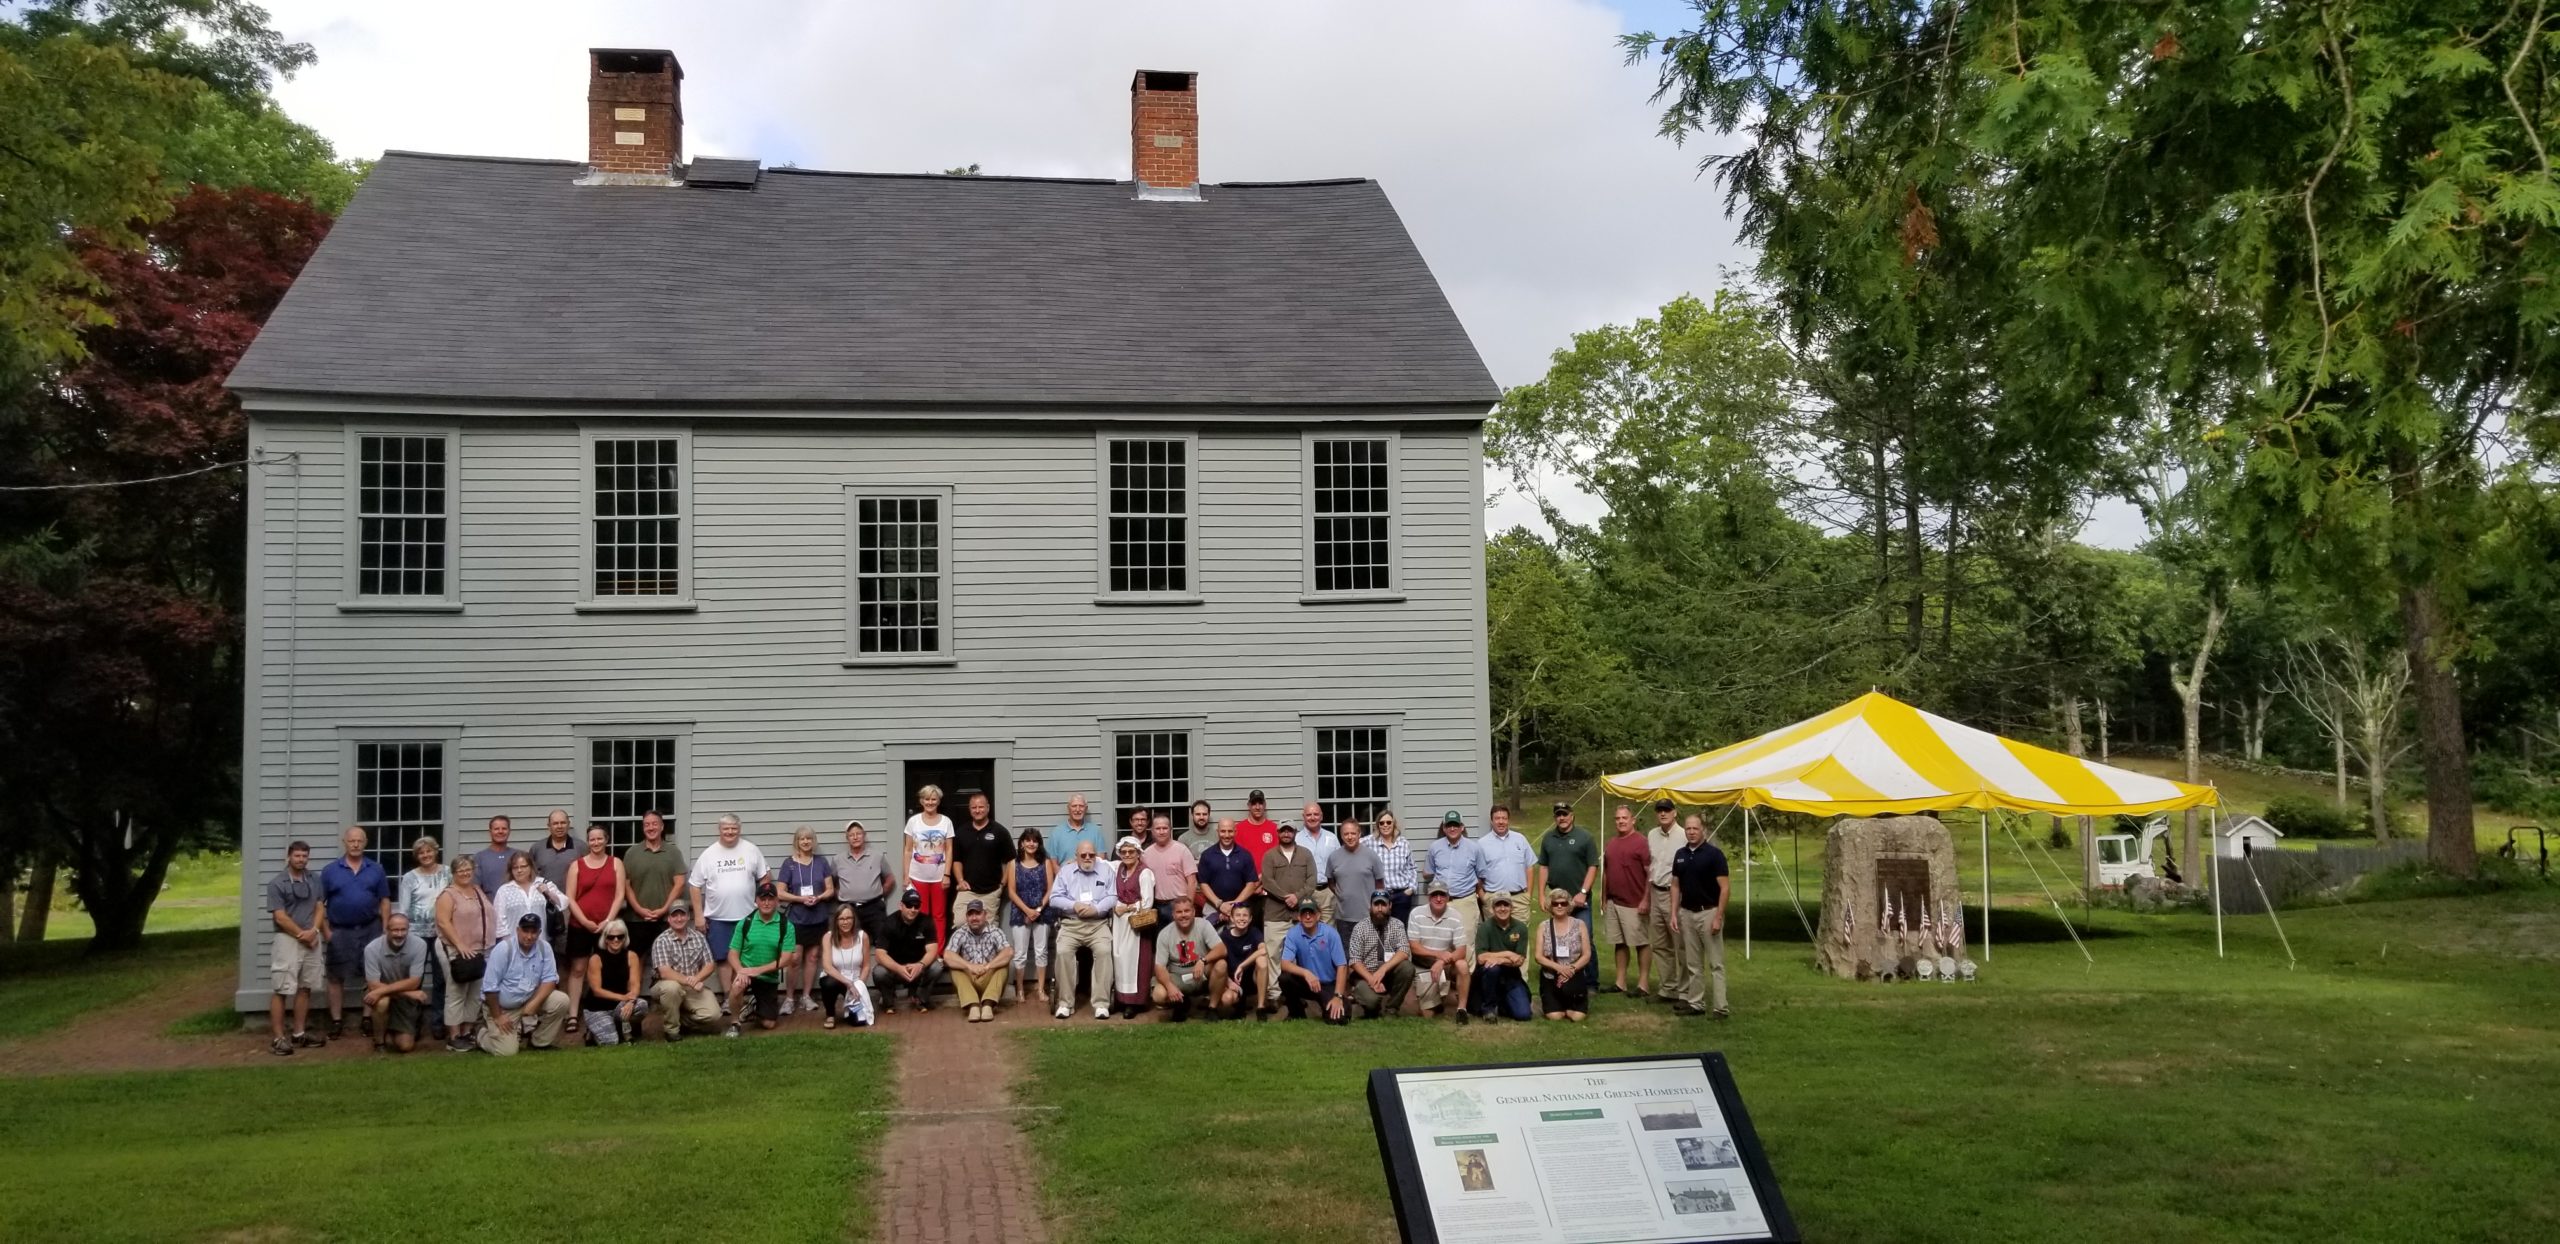 Group picture of tourists with the view of the General Nathanael Greene Homestead, Coventry, Rhode Island. Homestead, Coventry, Rhode Island.